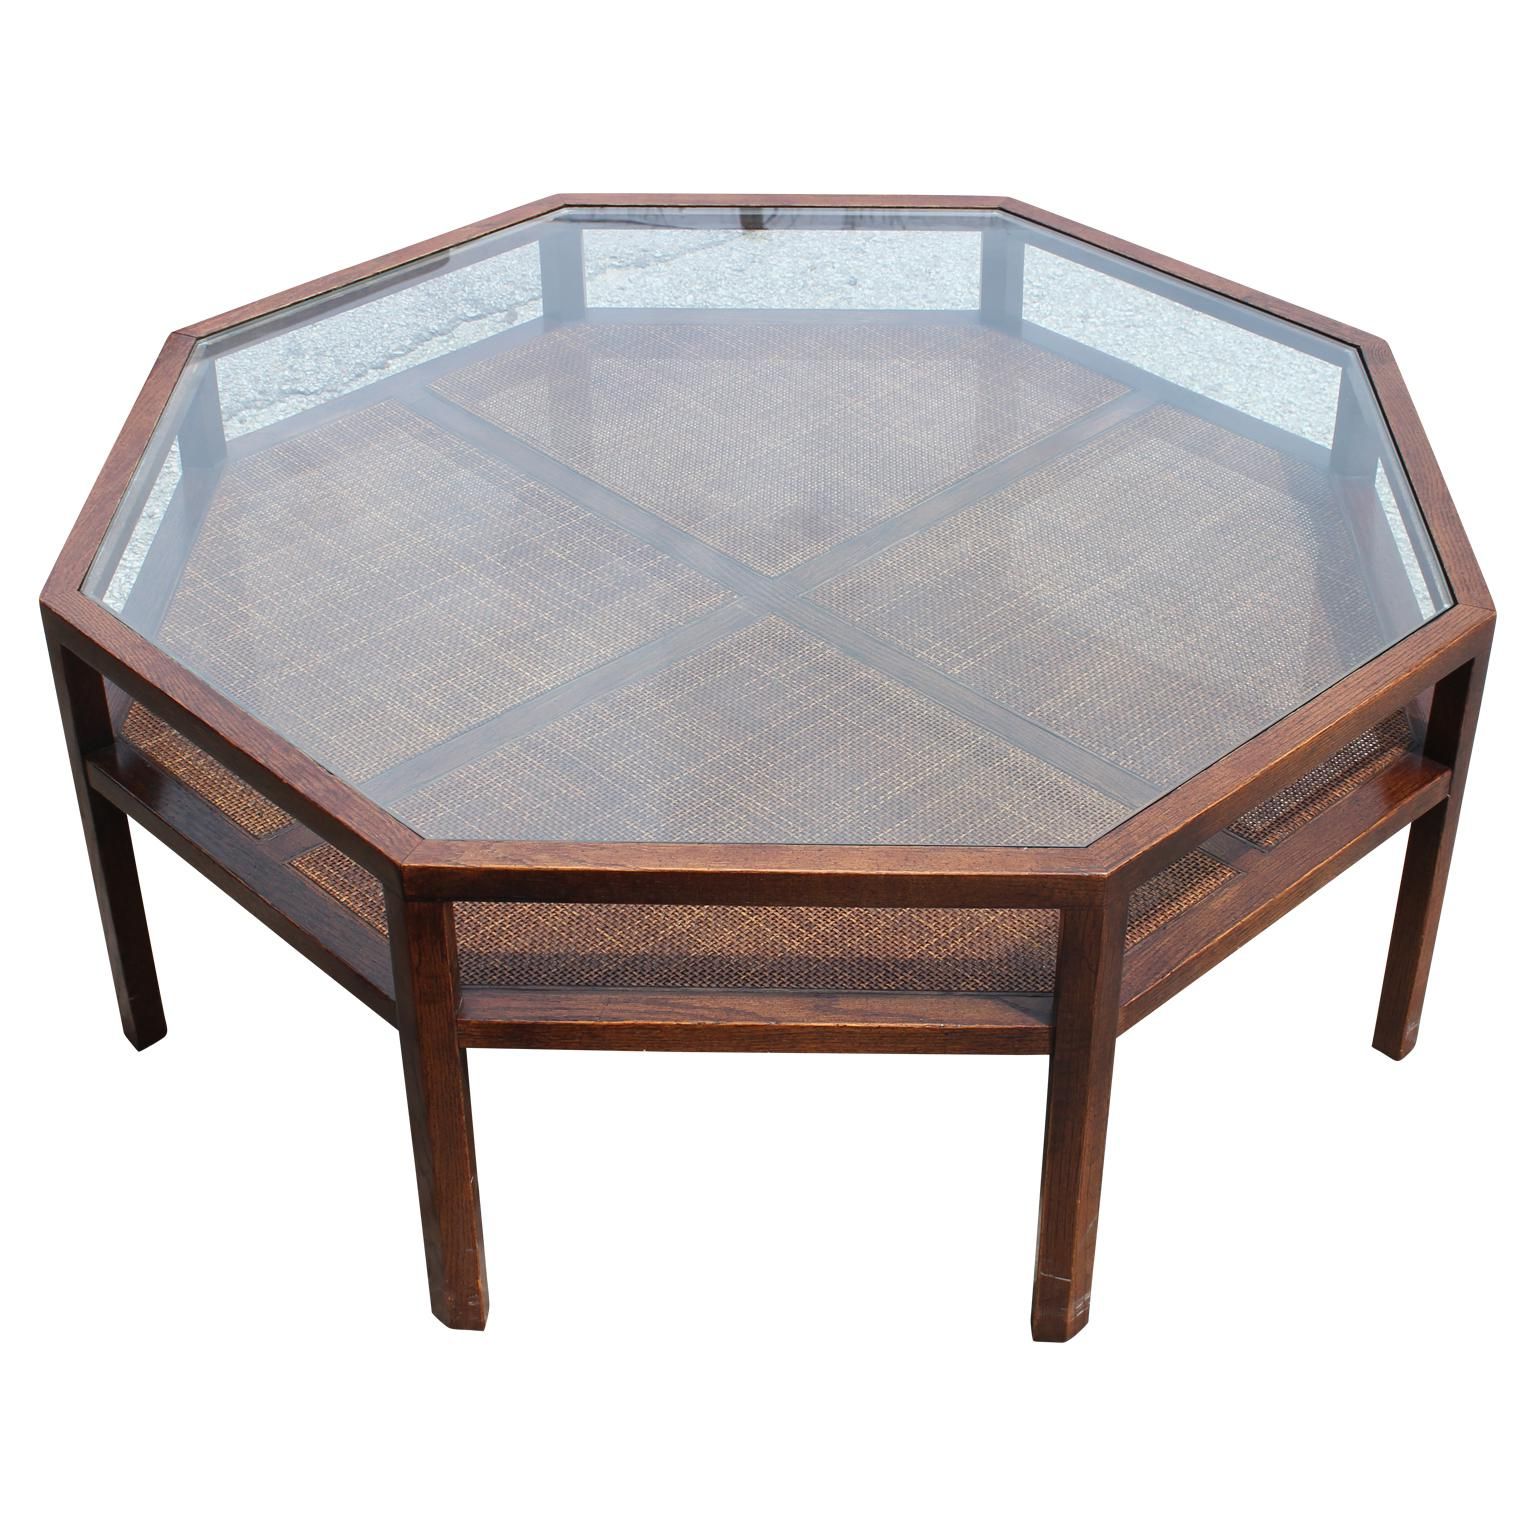 Modern Octagon Or Round Walnut Coffee Table With Glass Top At 1stdibs Throughout Most Up To Date Octagon Glass Top Coffee Tables (View 6 of 20)